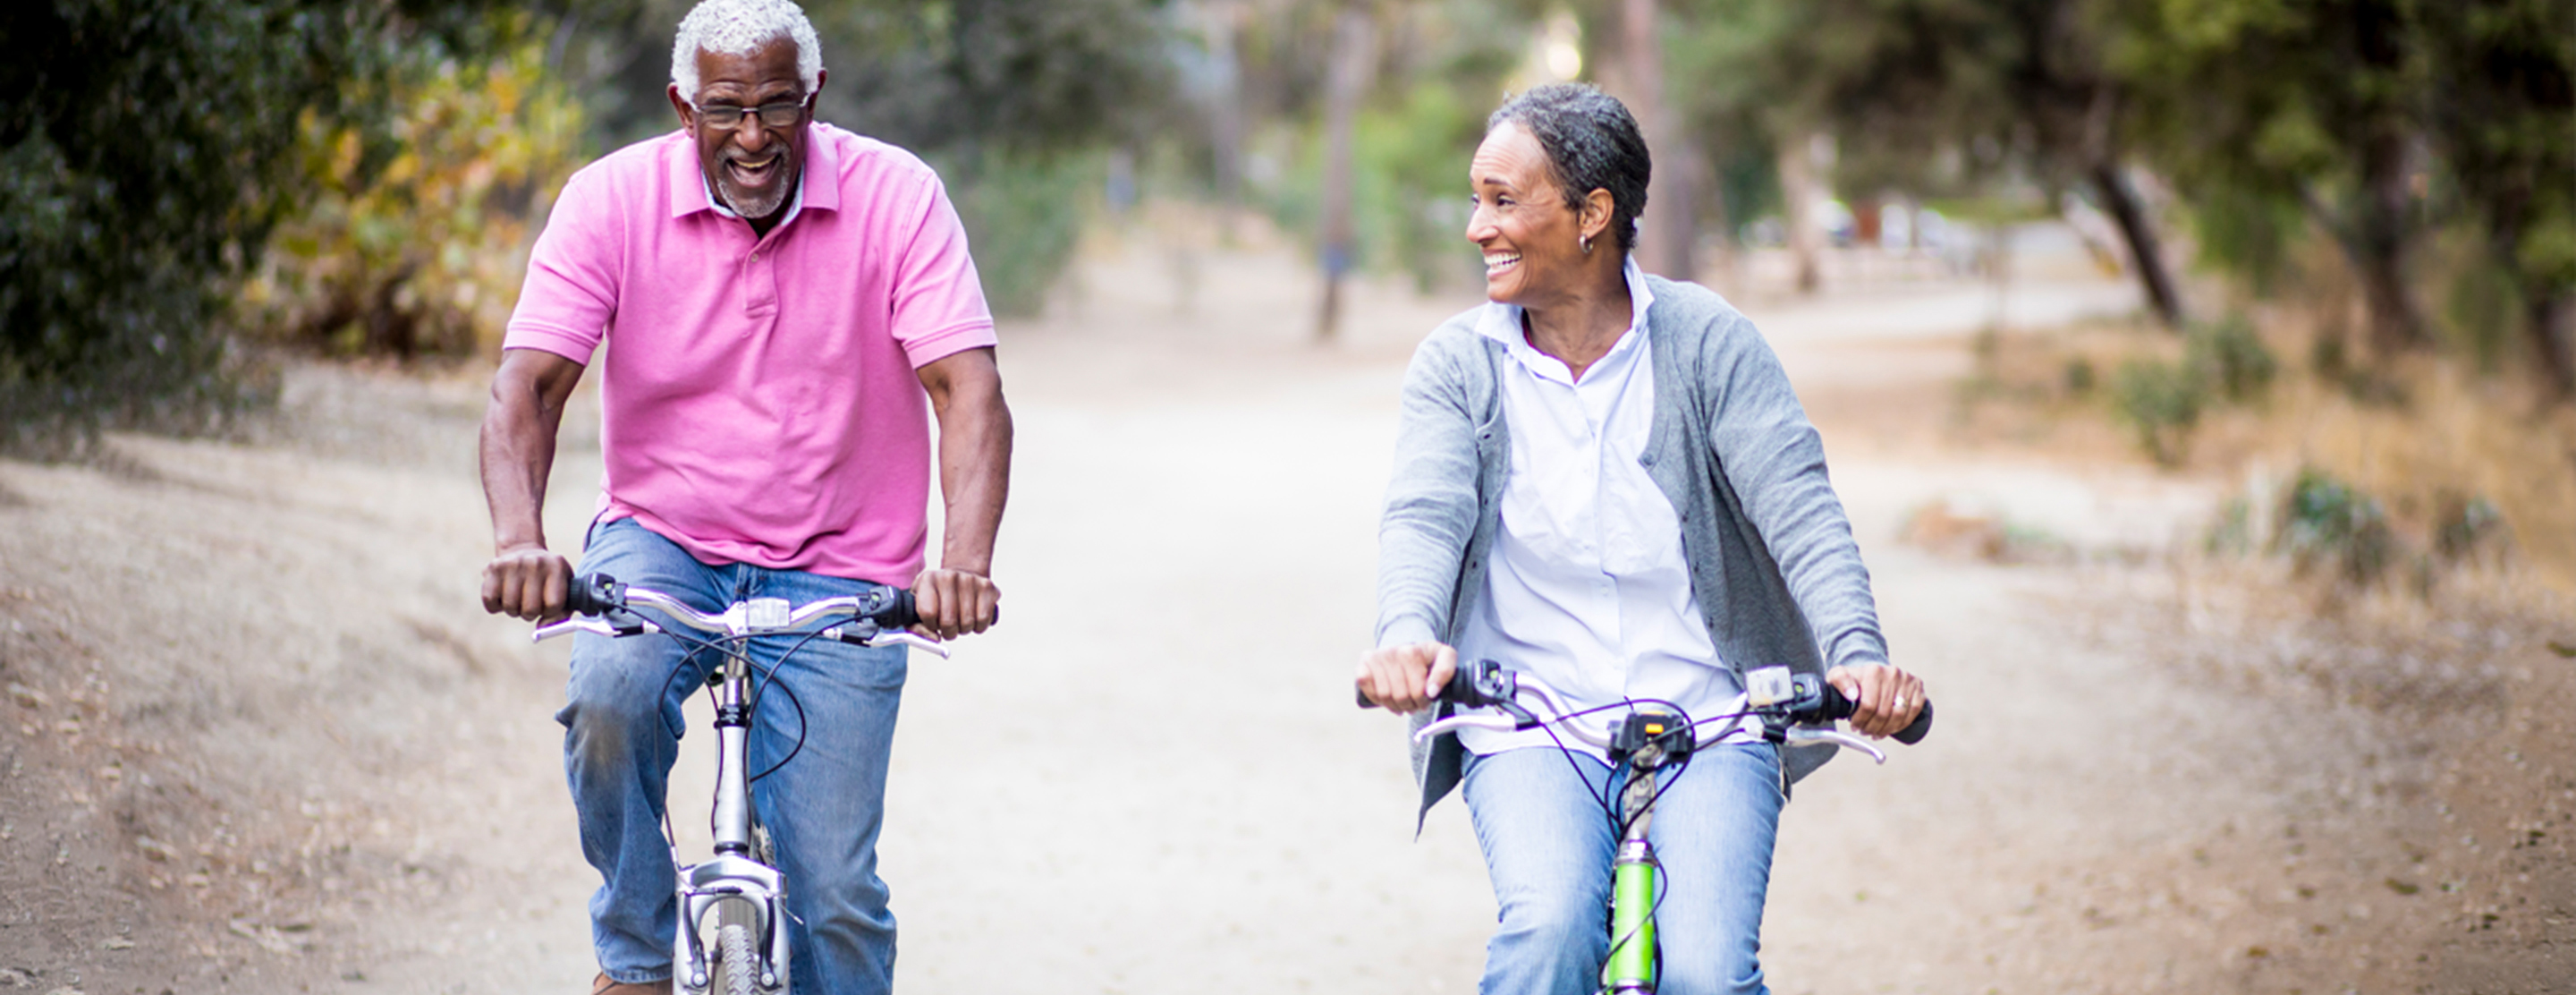 Healthy Aging | Patient Education | UCSF Health